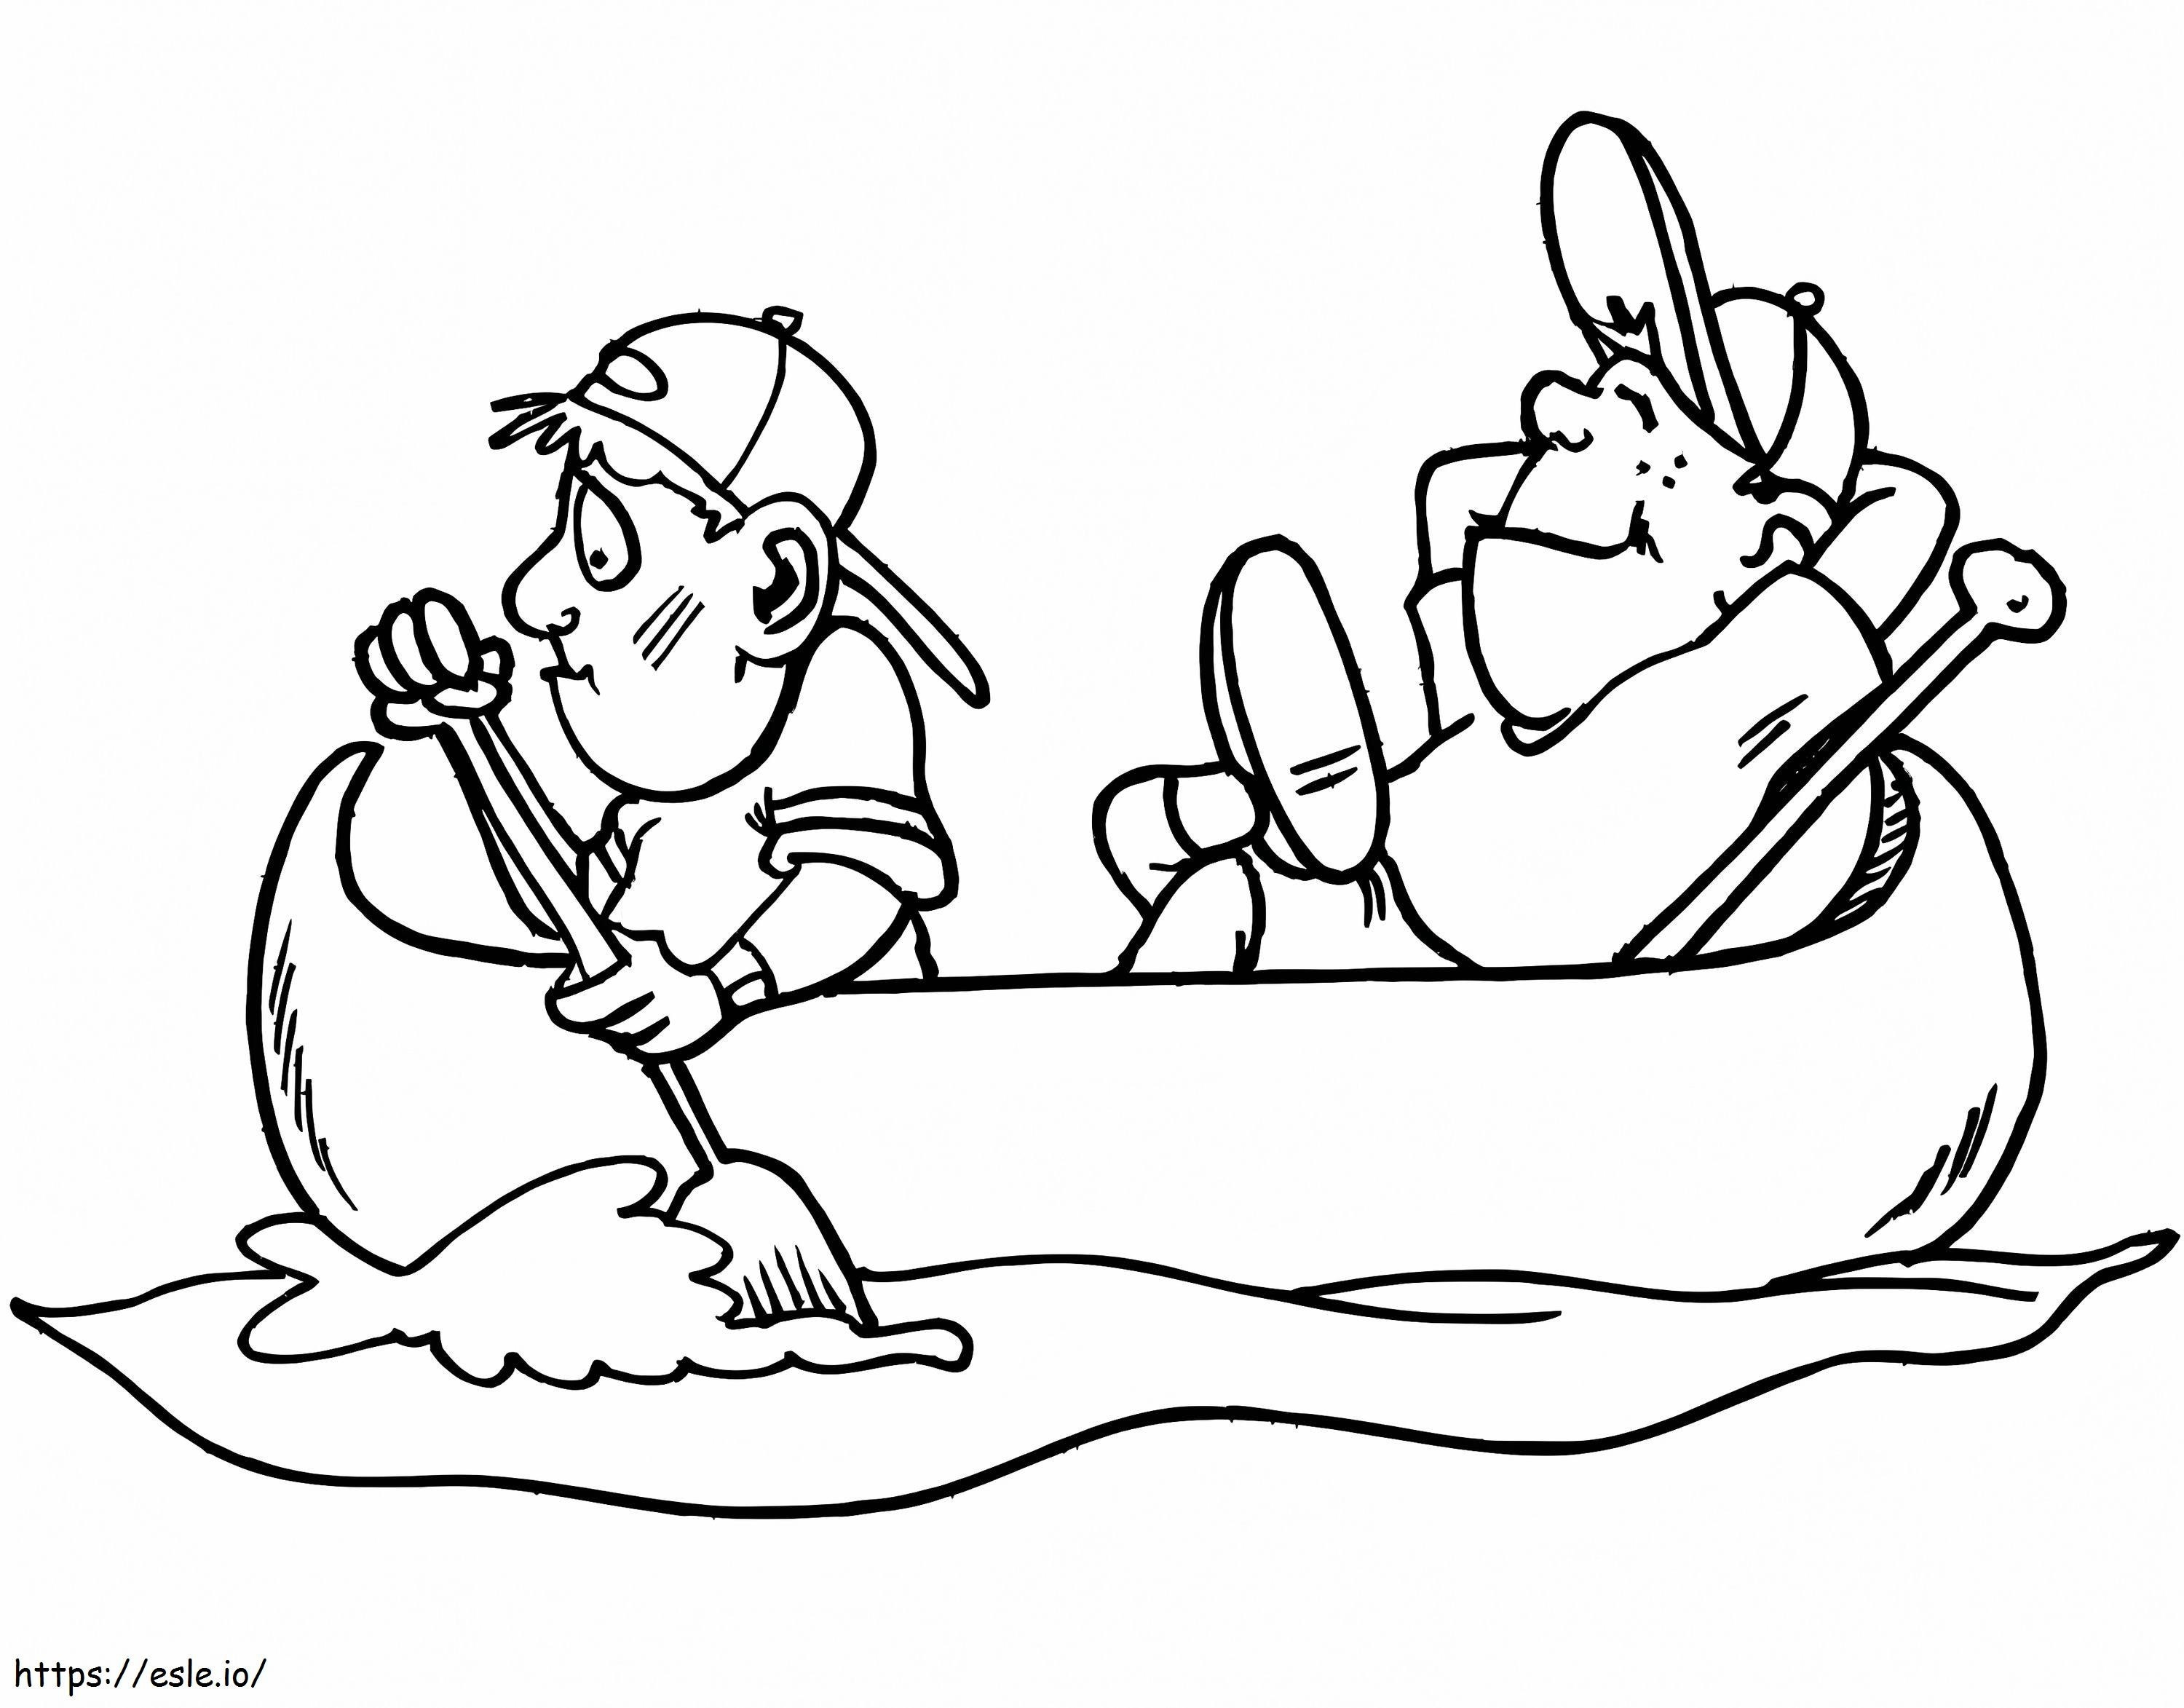 Funny Rowing coloring page